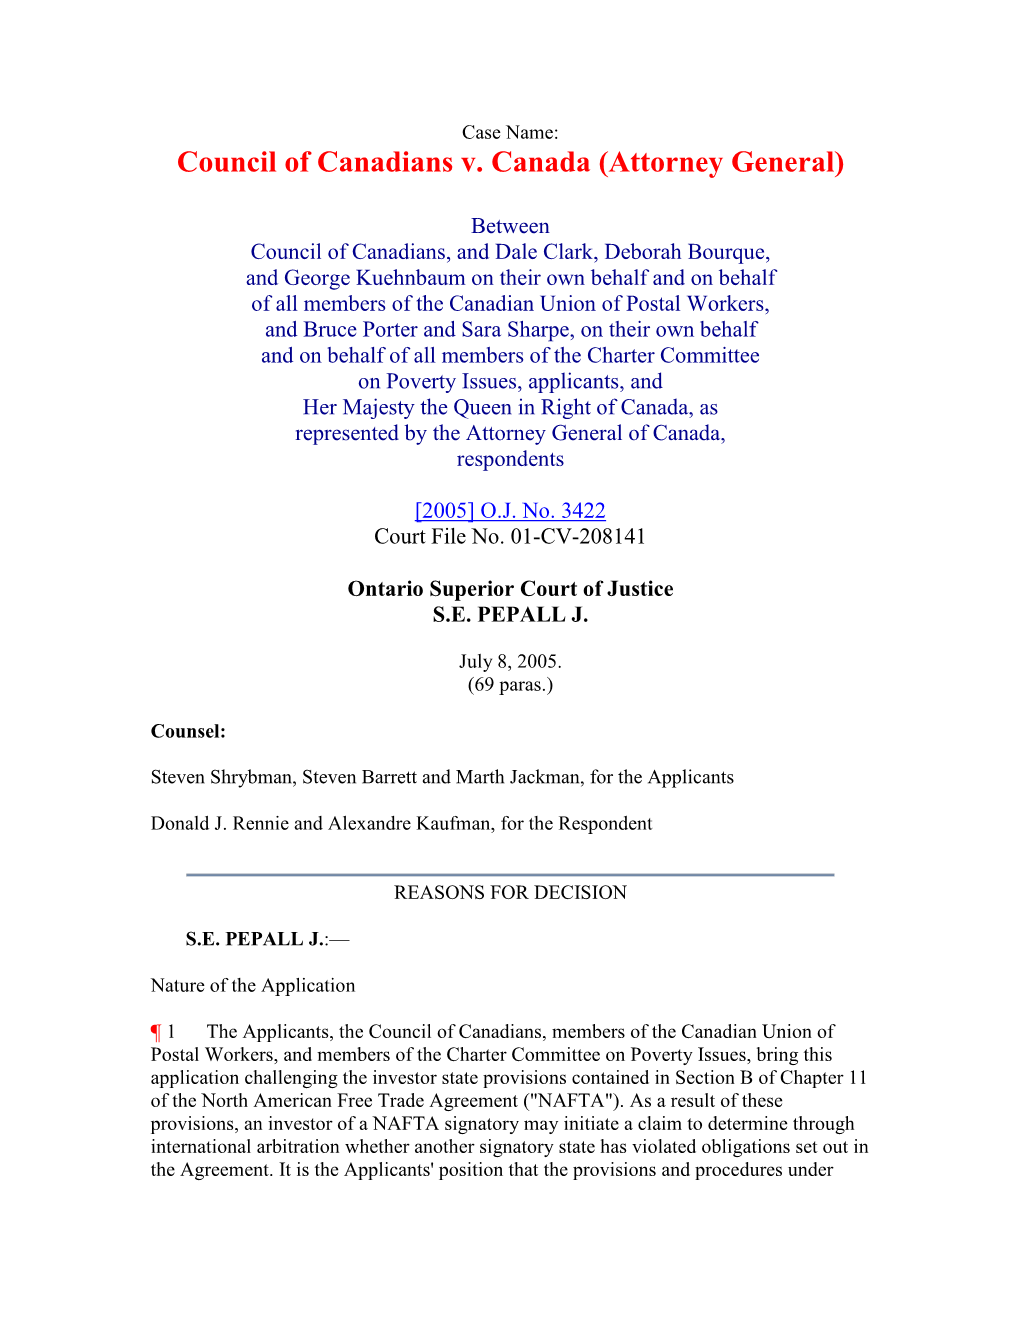 Council of Canadians V. Canada (Attorney General)